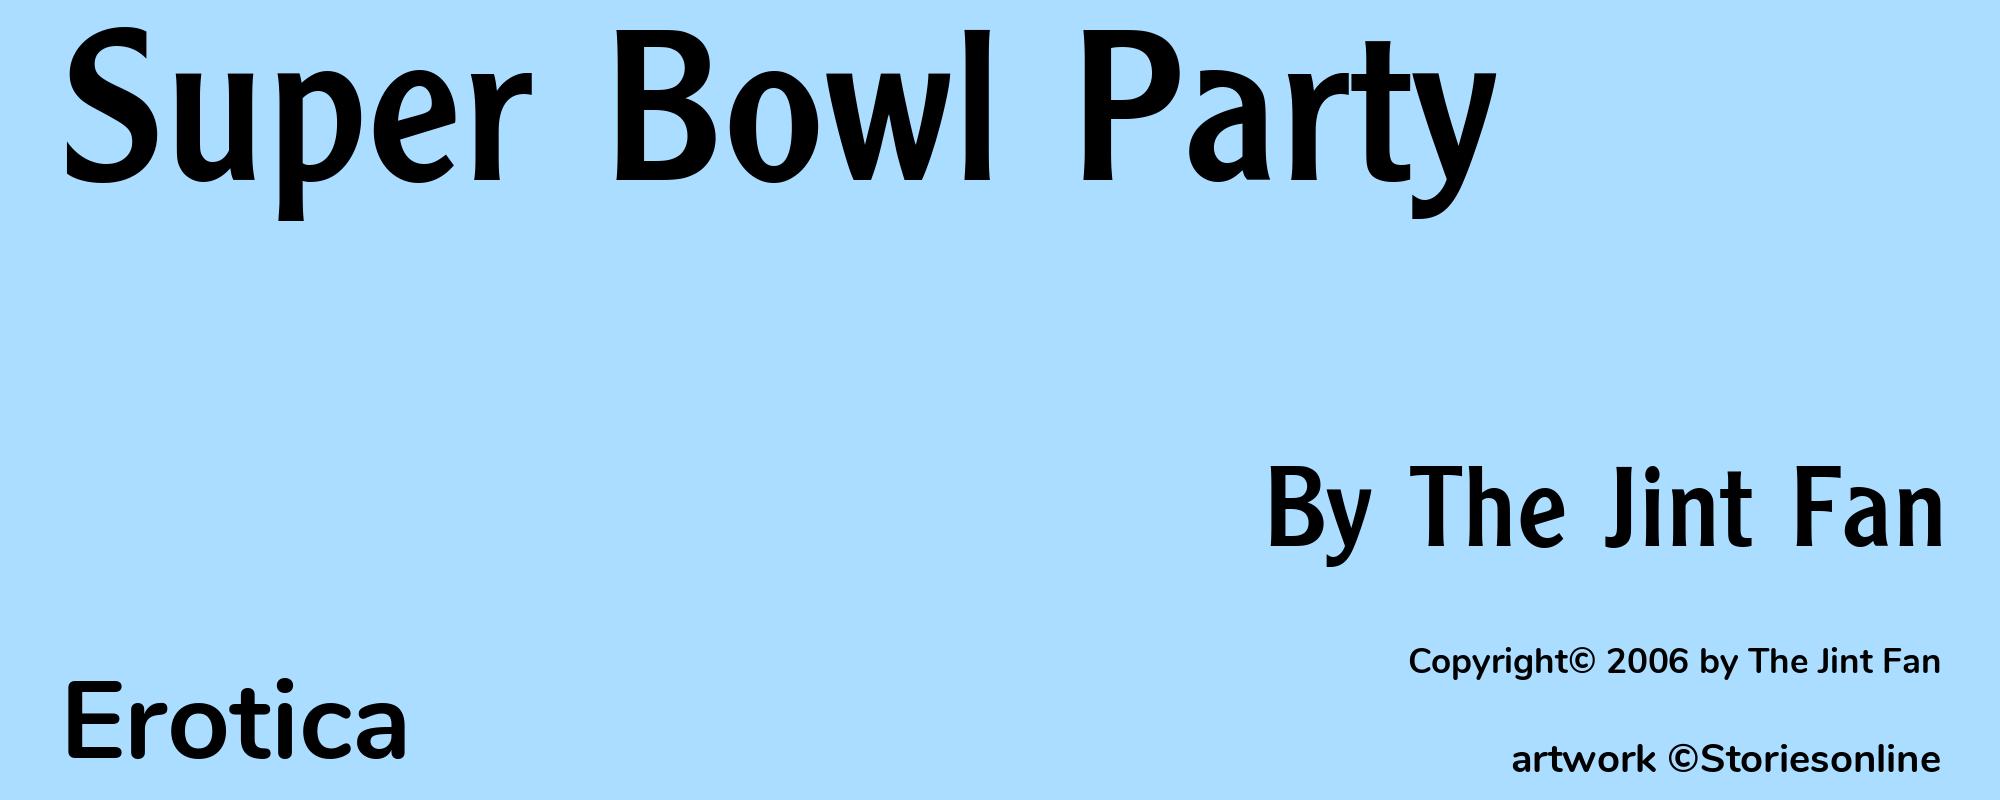 Super Bowl Party - Cover